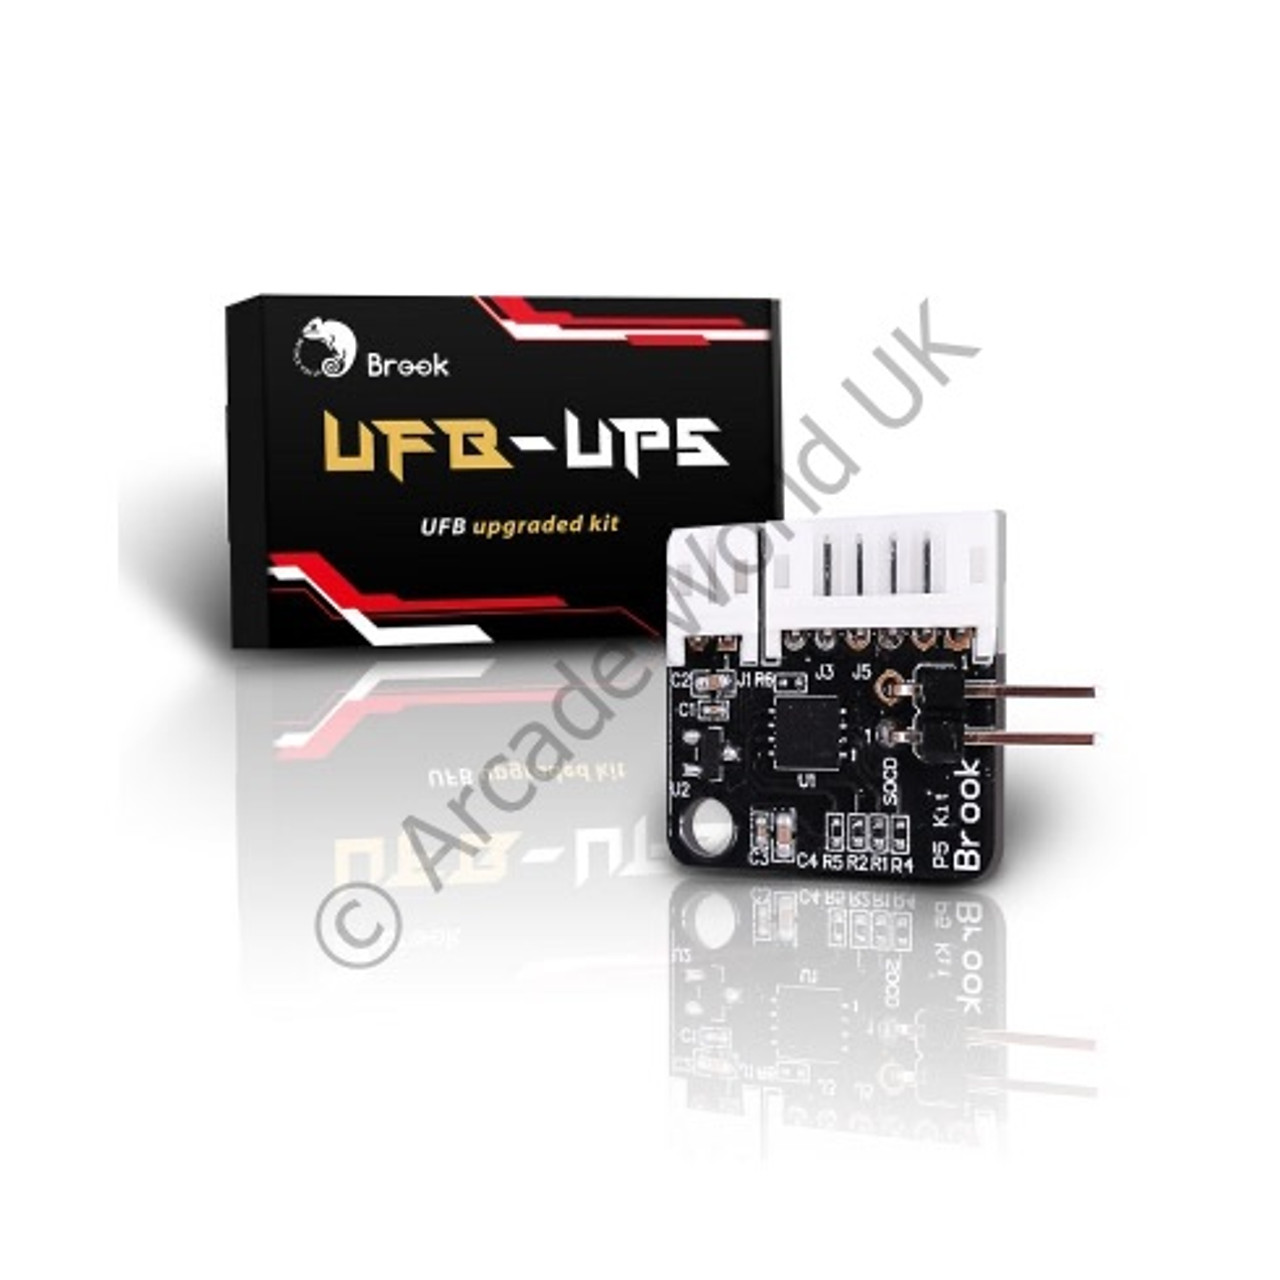 Brook UFB-PS5 Upgrade Kit For Universal Fighting Board